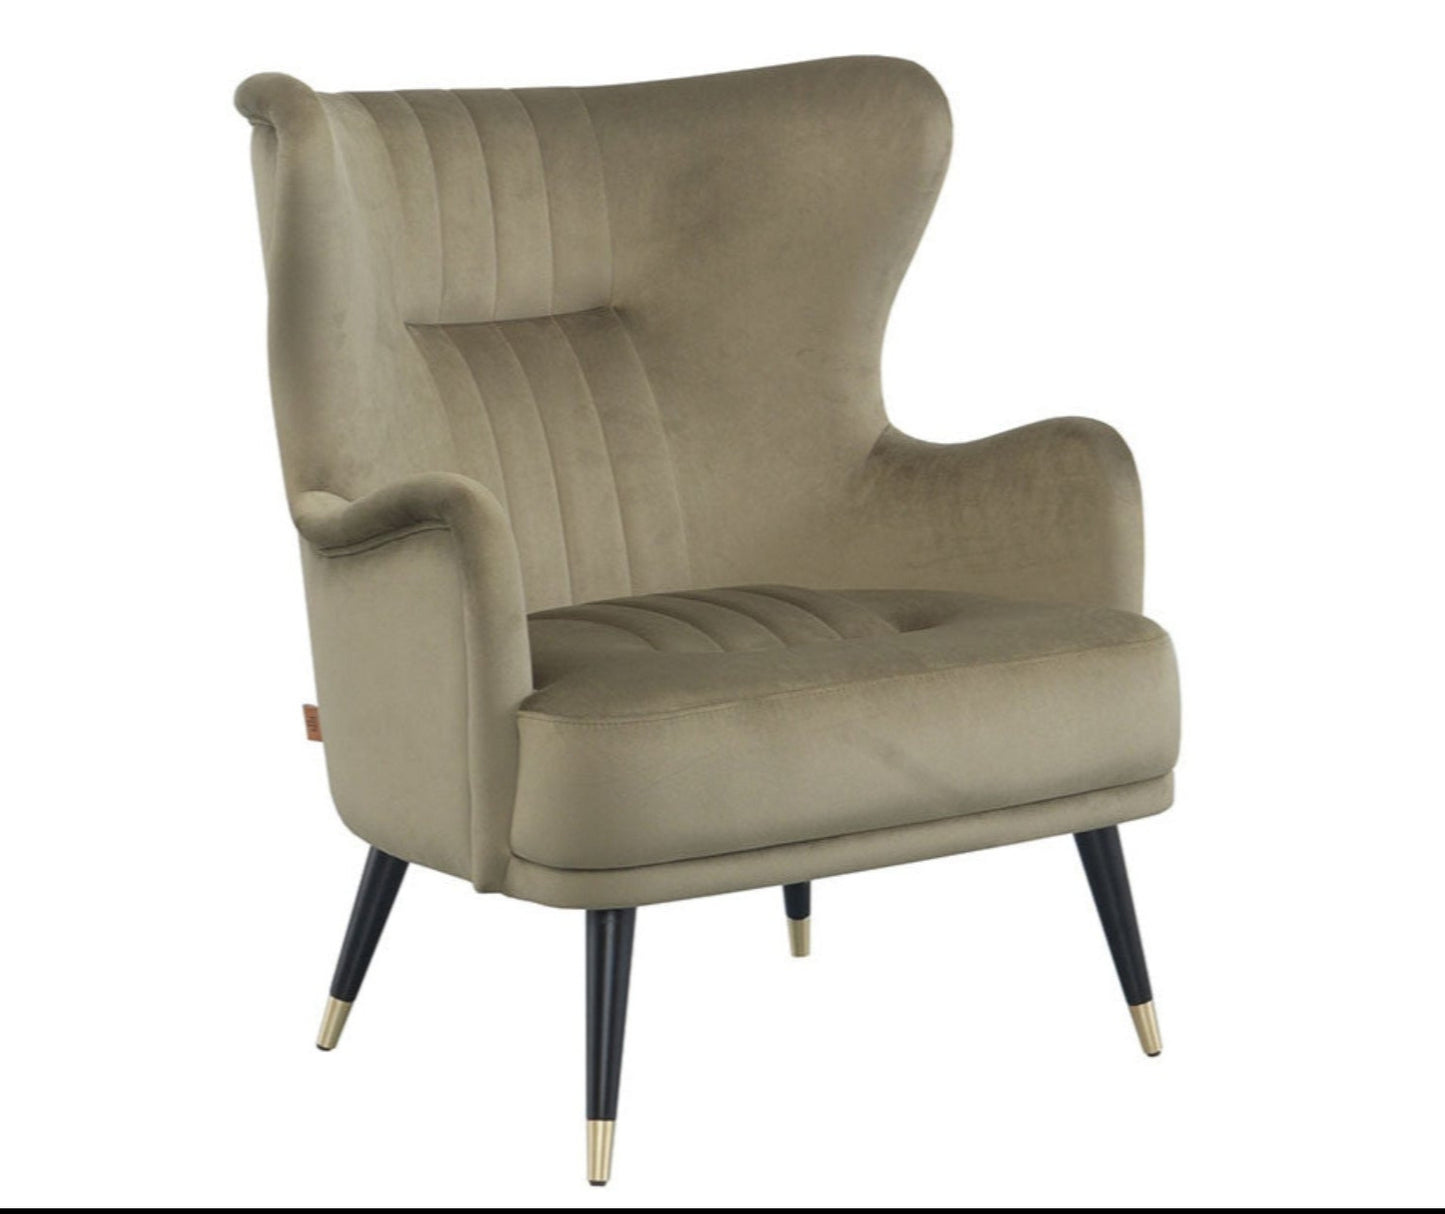 Olive velvet armchair with dark wood legs and gold tip ends on feet.